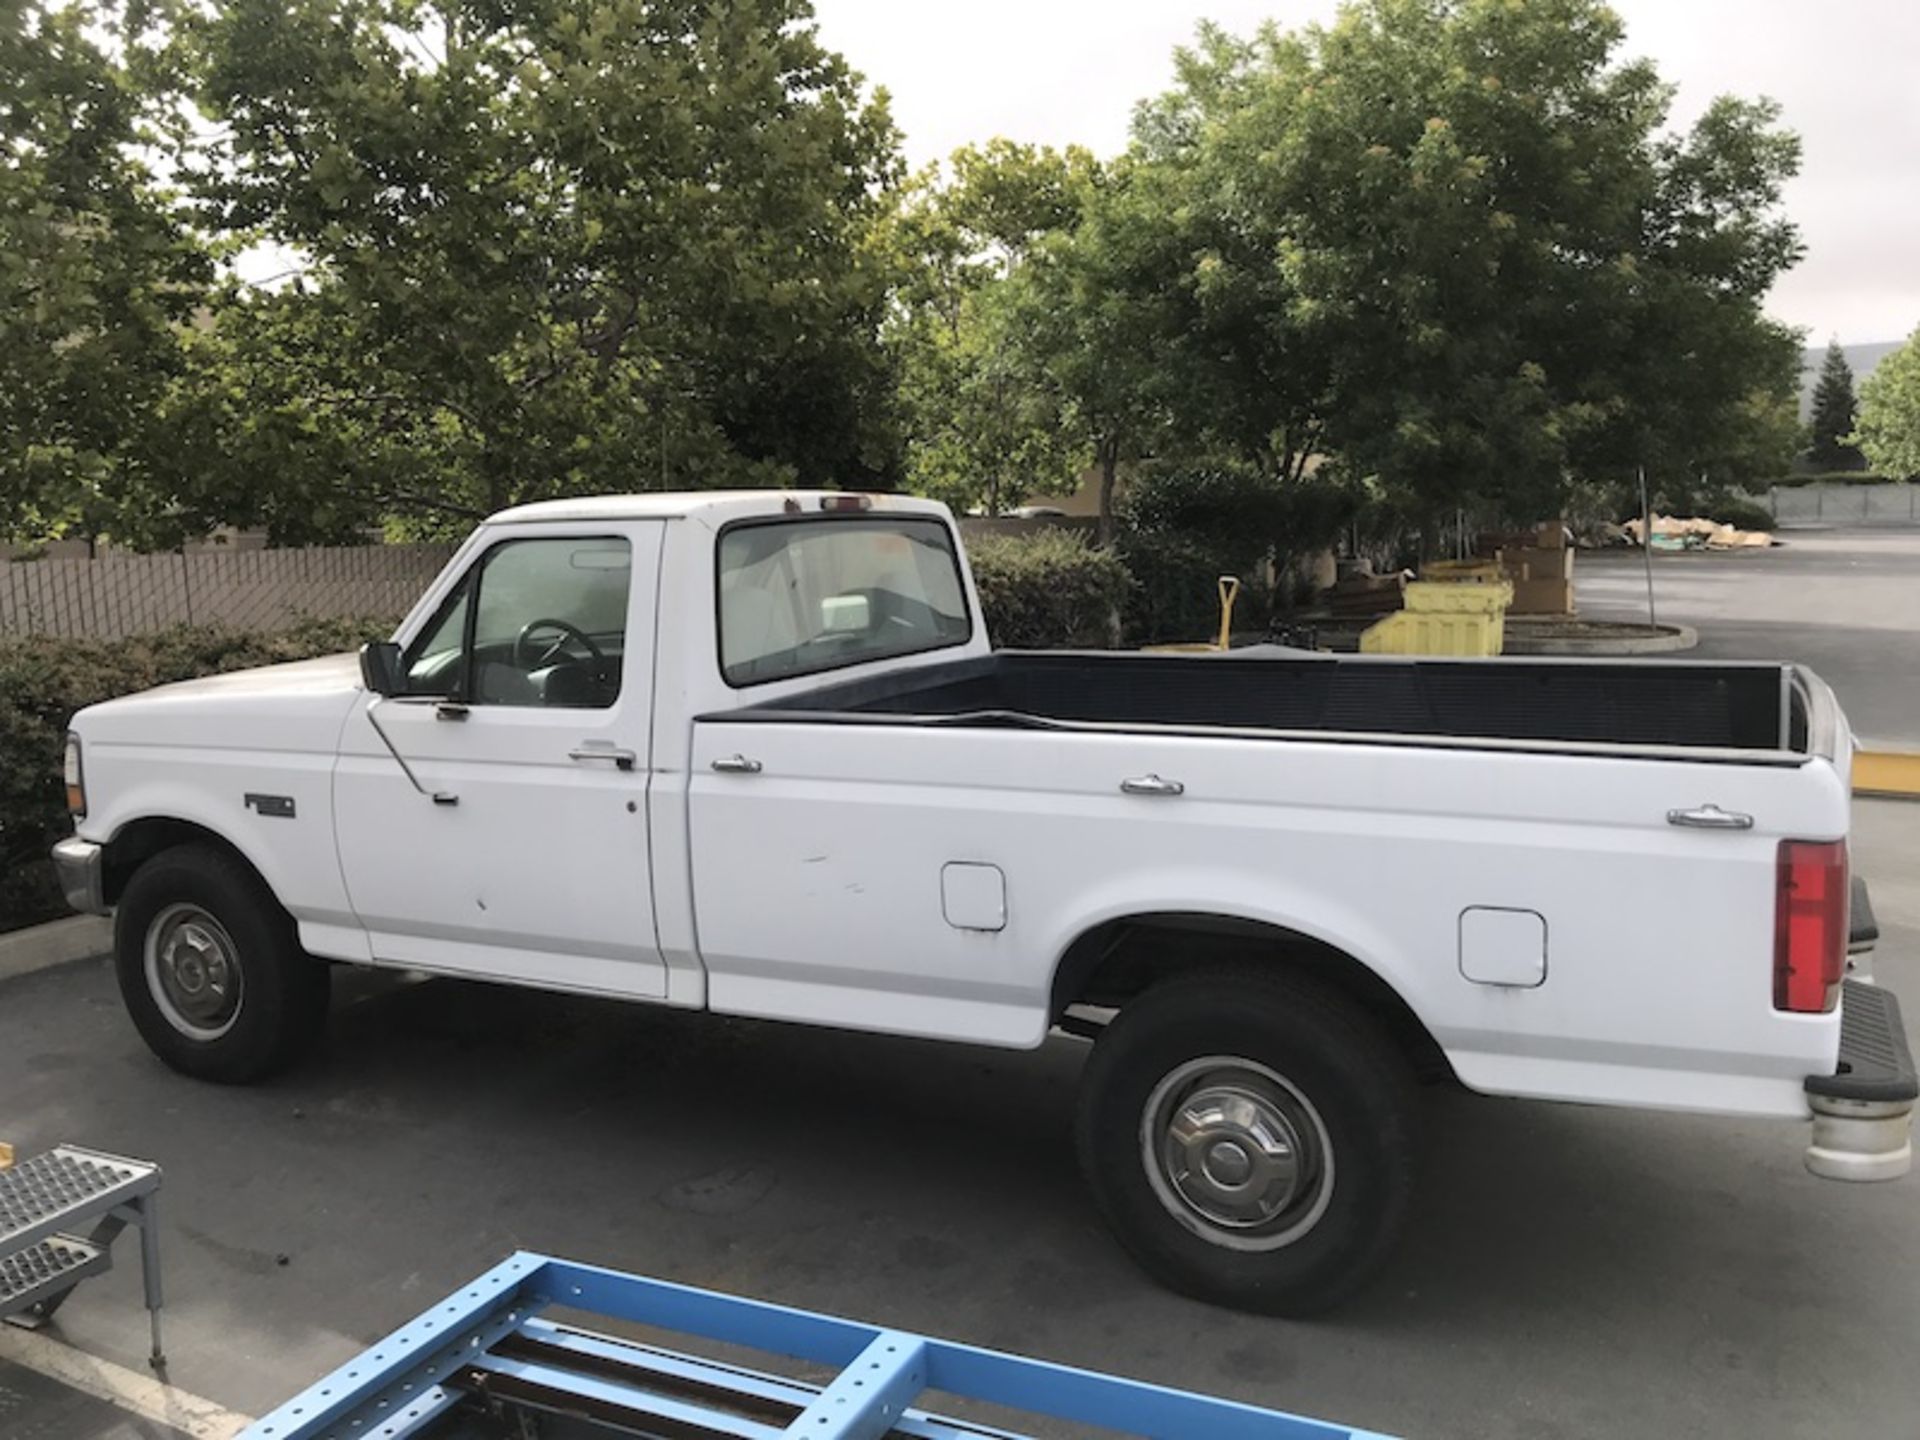 1997 Ford F250, VIN: 3FTHF25G1VMA59758 (No Title - Sold Bill OF Sale Only) - Image 3 of 12